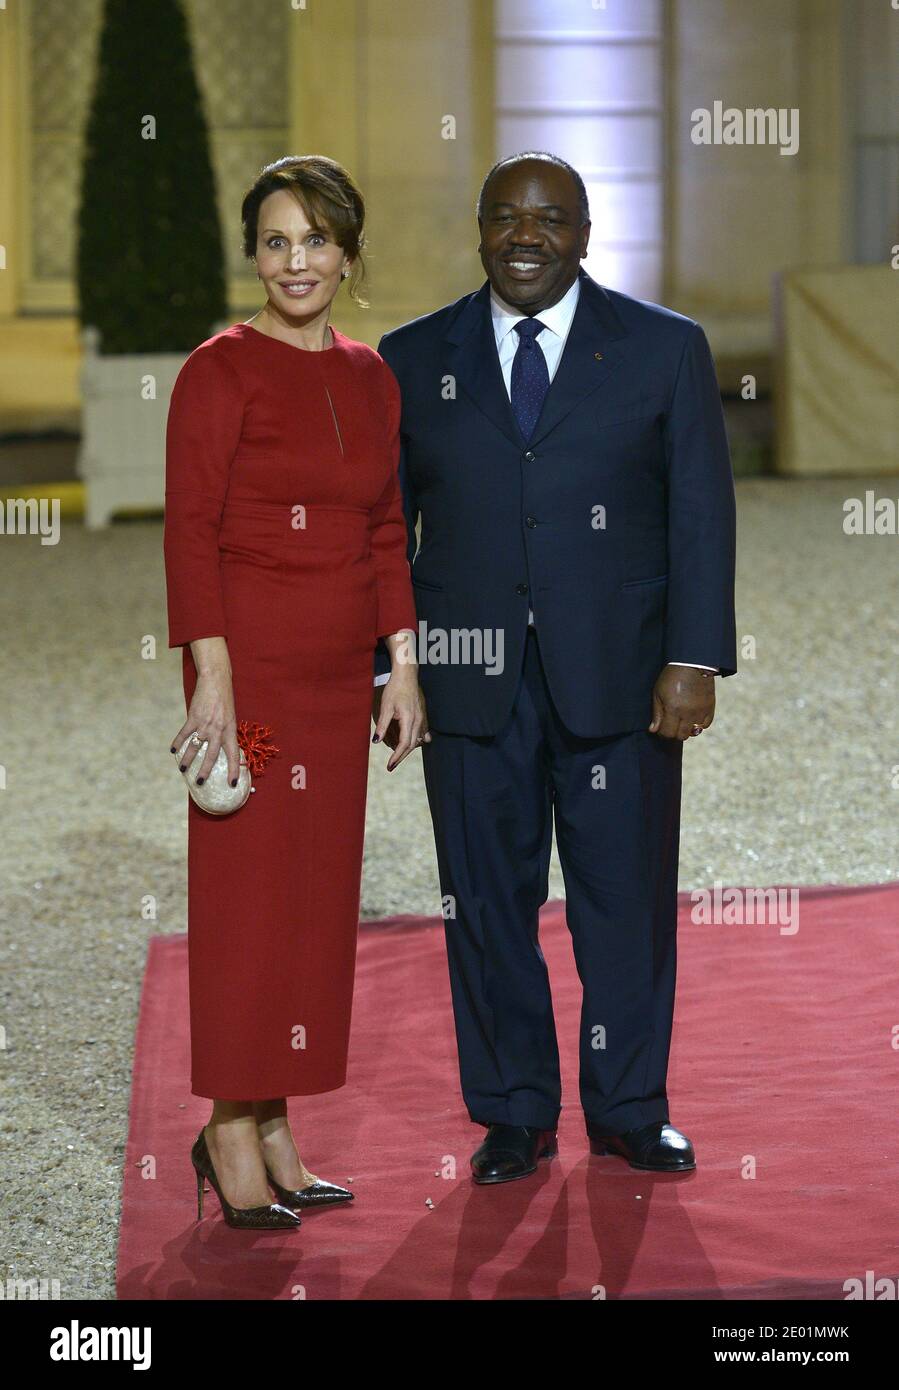 Gabon's president Ali Bongo Ondimba (C) and Gabon's first lady Sylvia Bongo  Ondimba arrive for a dinner with the French President and other dignitaries  as part of the Summit for Peace and